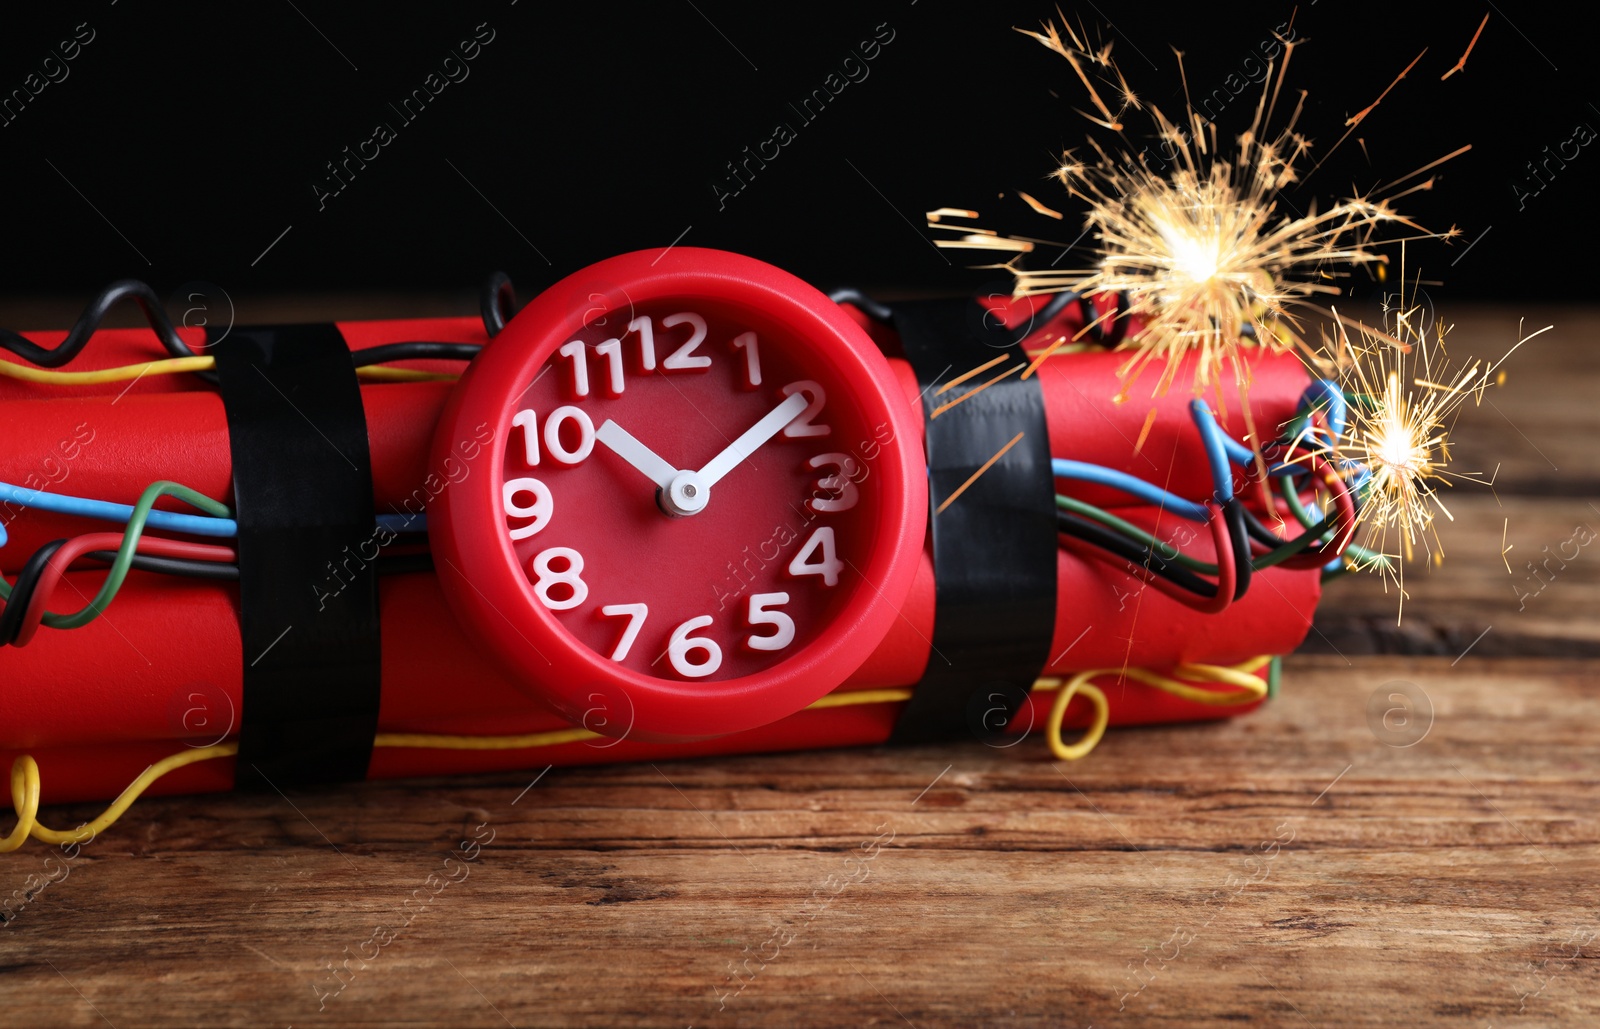 Image of Dynamite time bomb with burning wires on wooden table, closeup